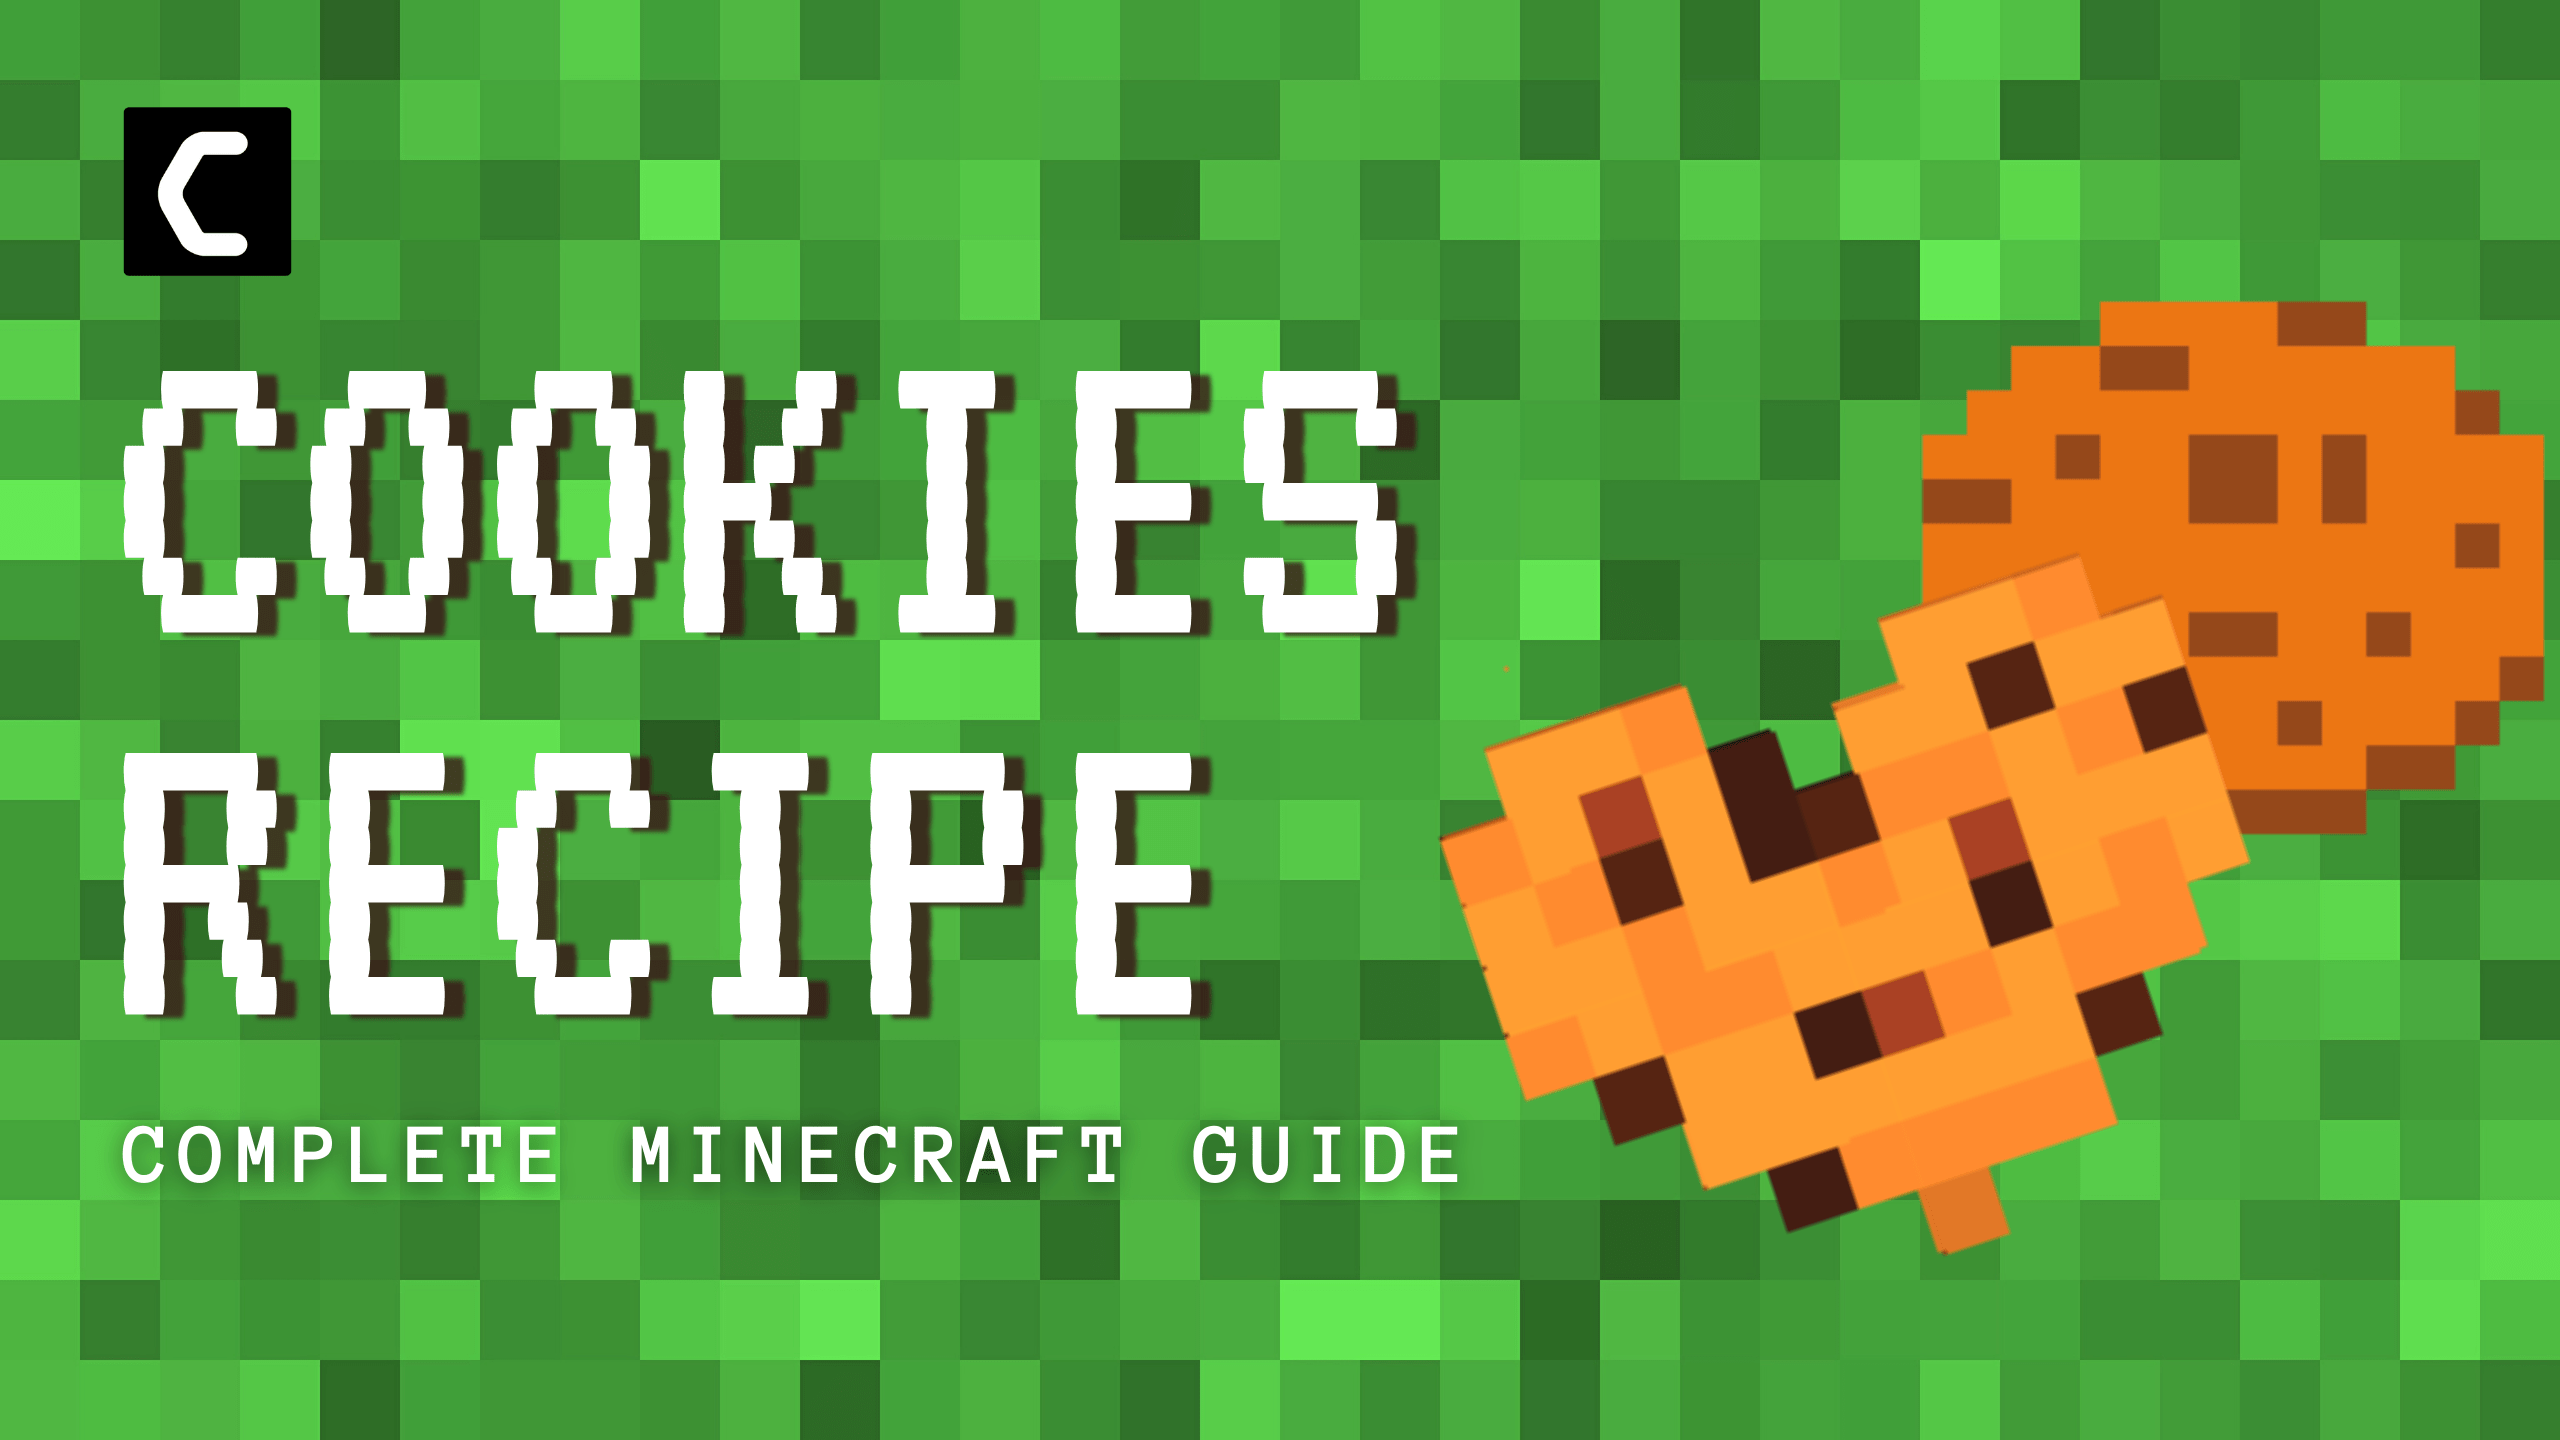 how to make cookies in minecraft